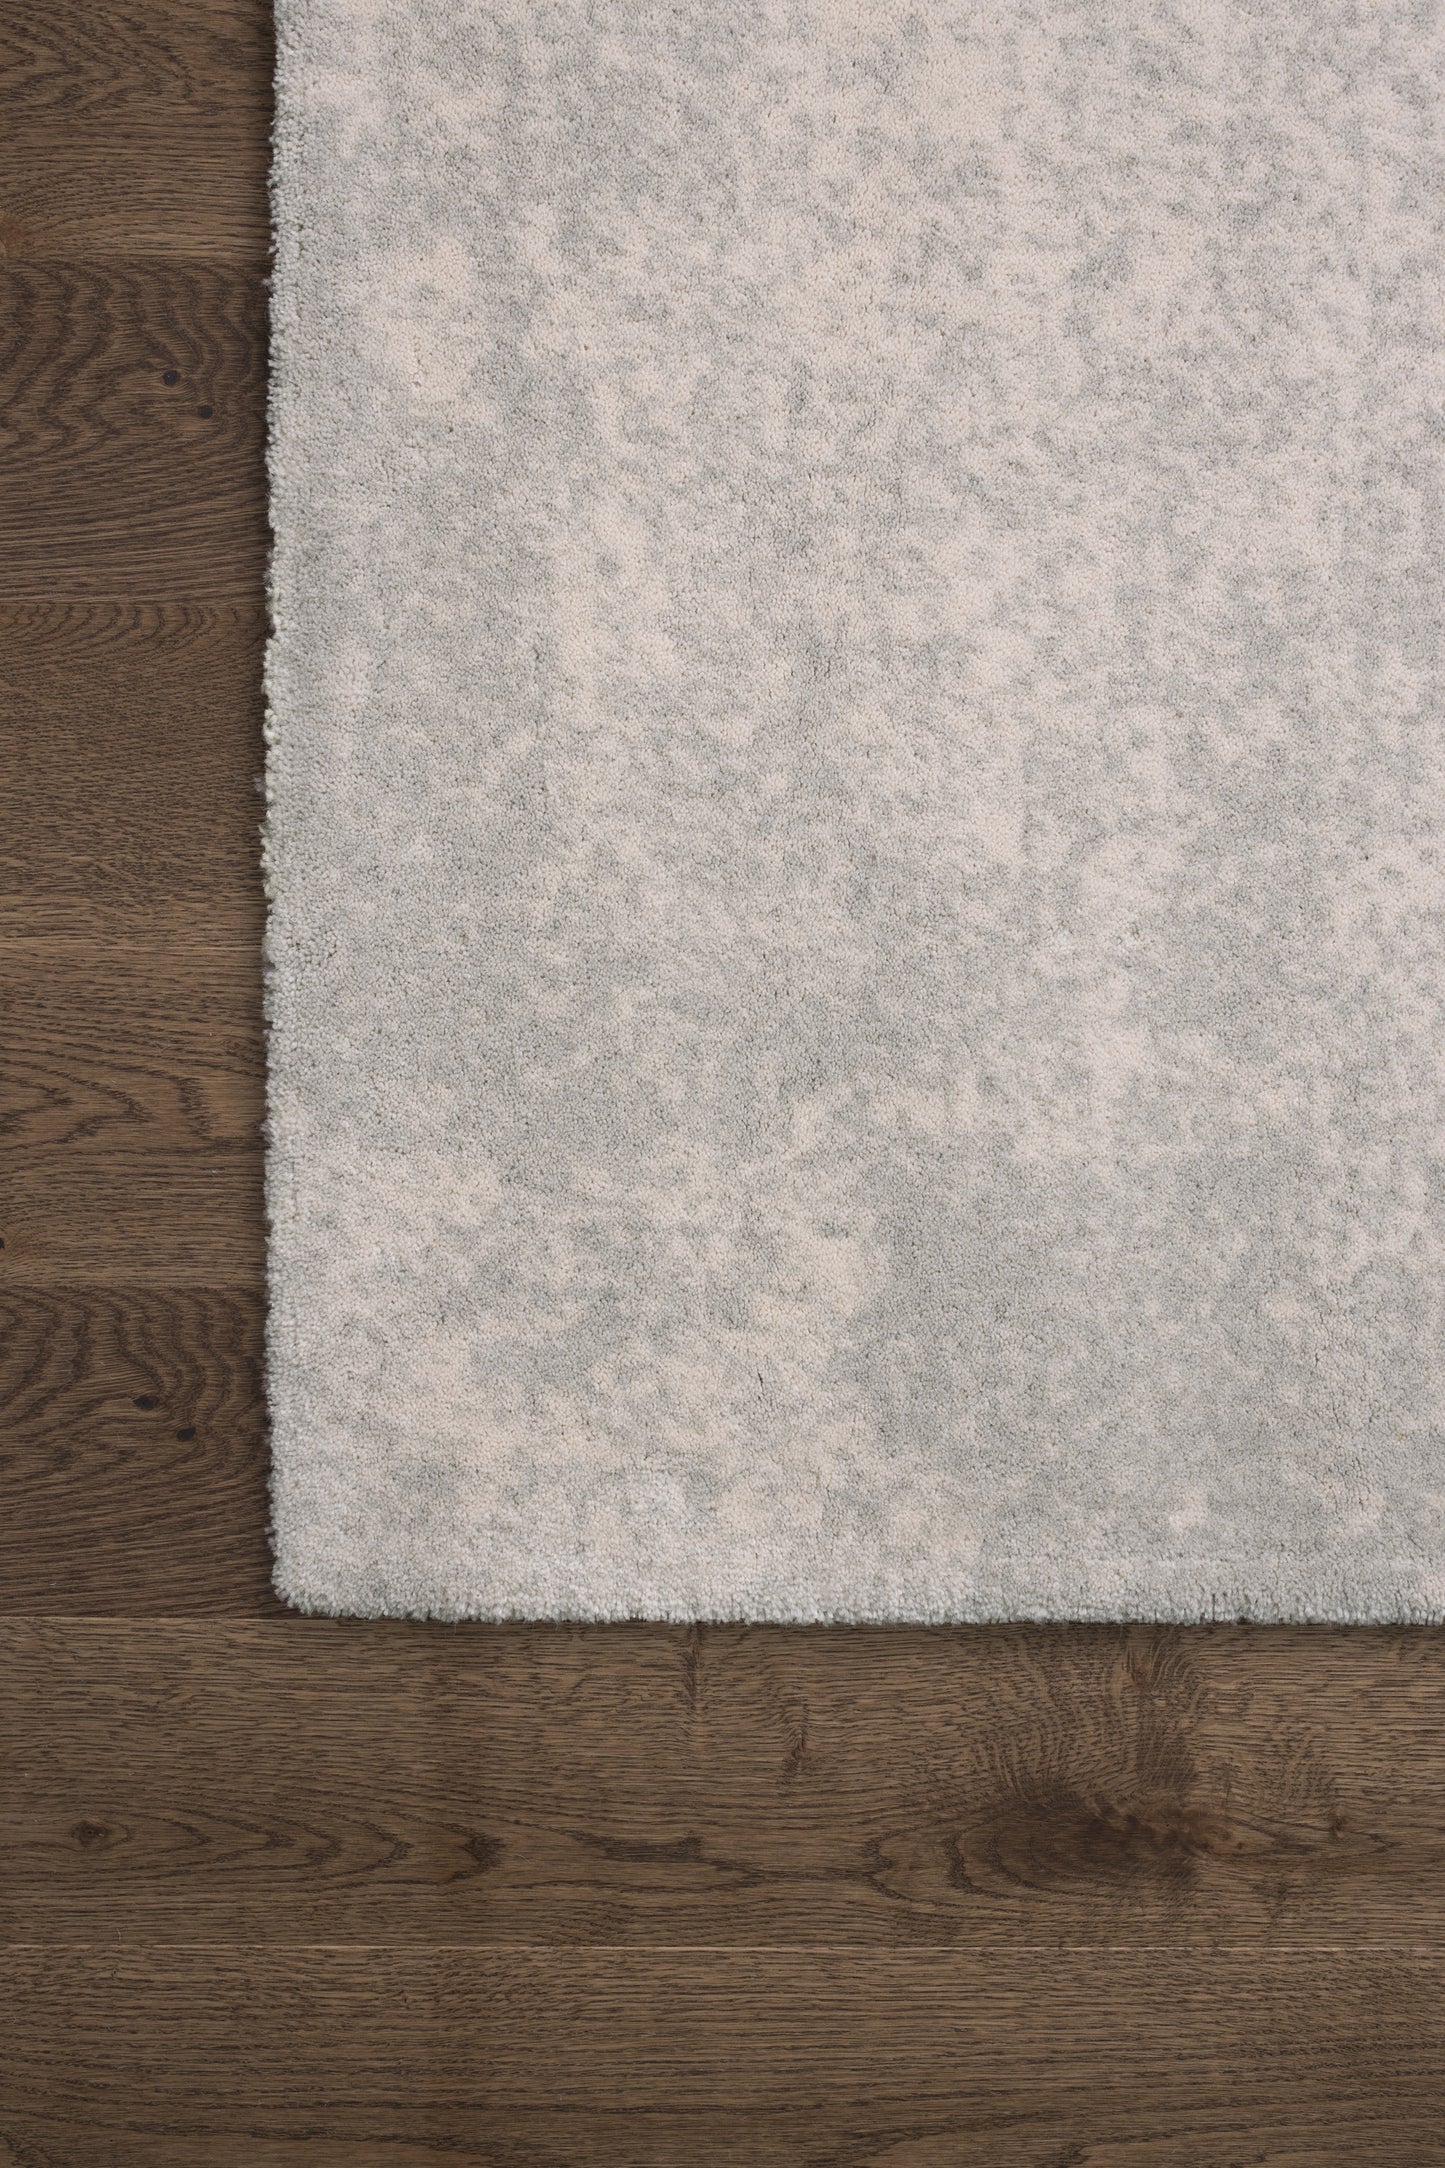 Agnella Rugs Calisia M TIZO Alabaster - 50% British Wool 50% New Zealand Wool - Free Delivery